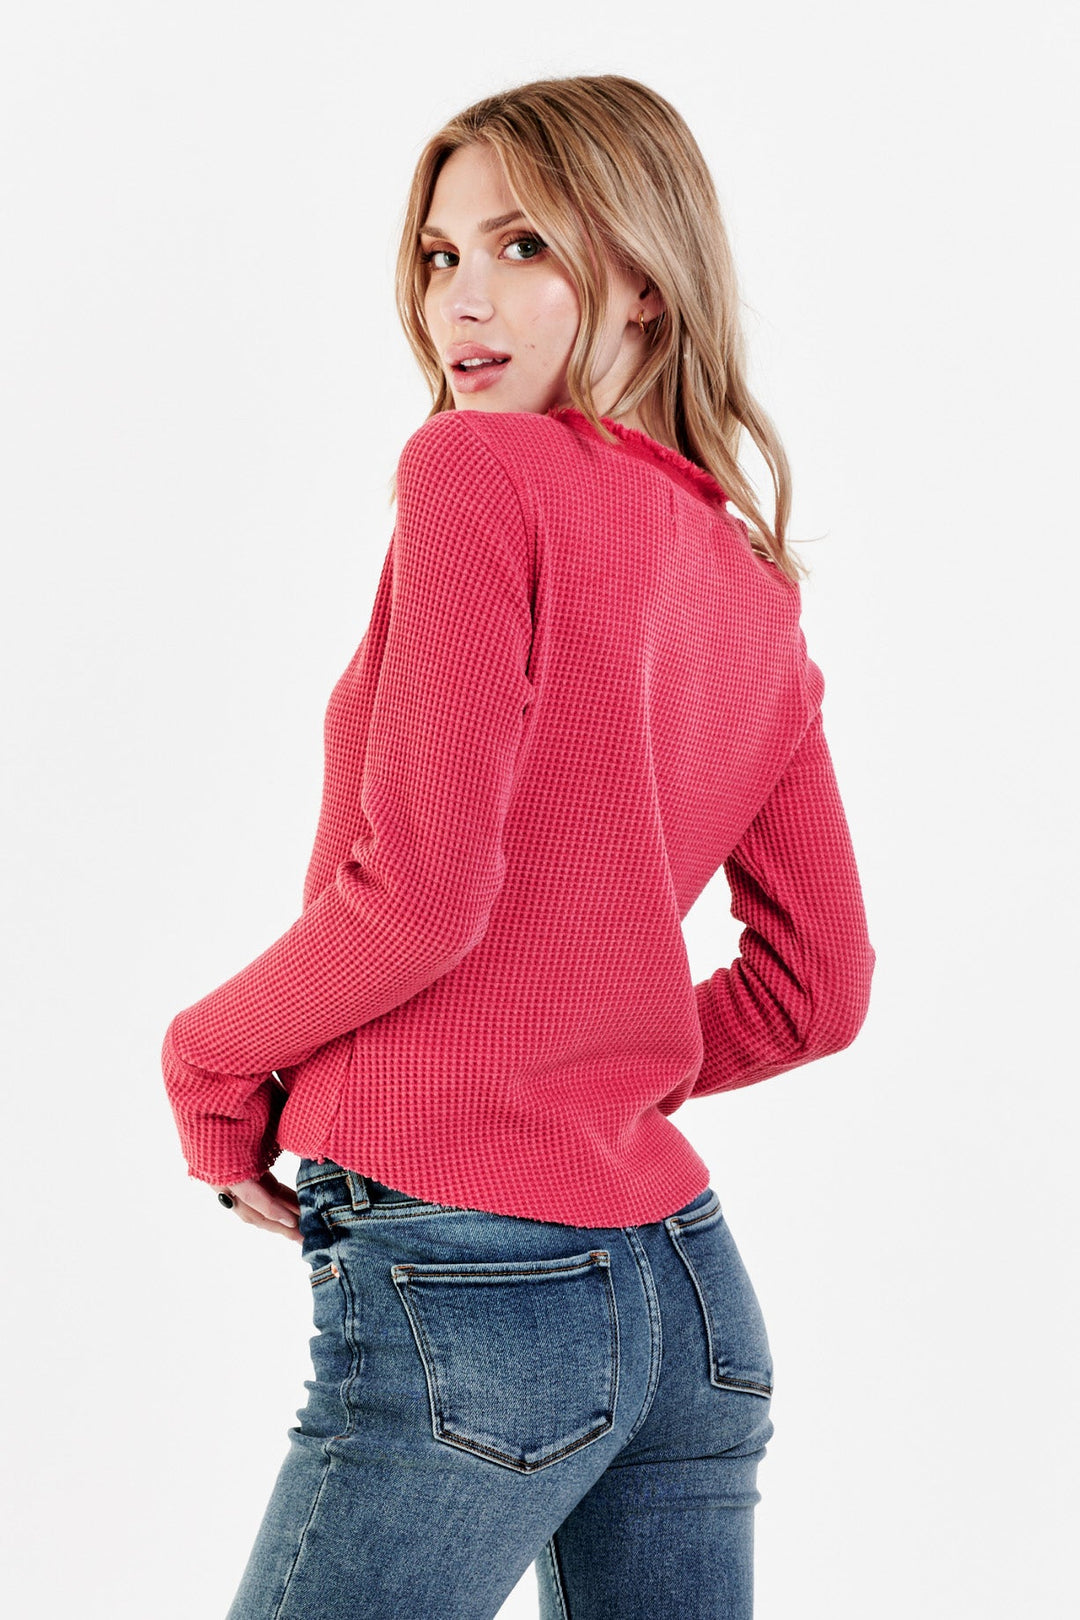 image of a female model wearing a  TOPS